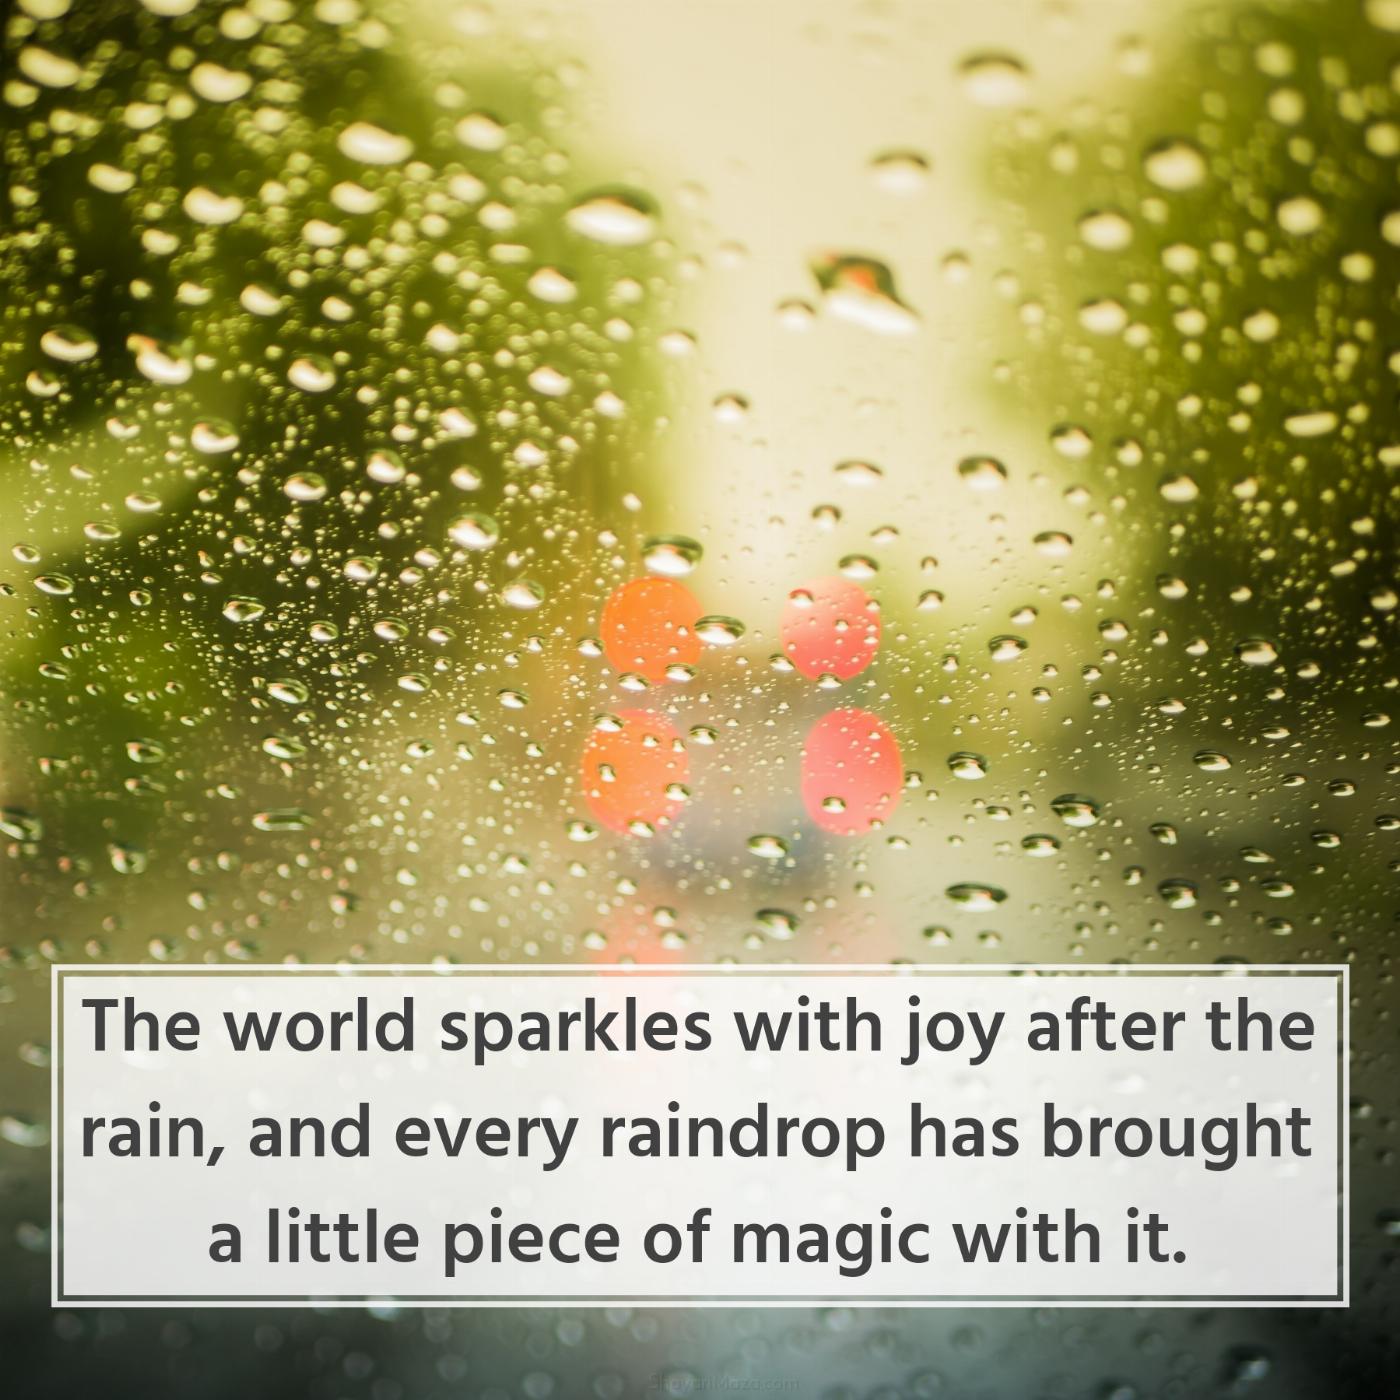 The world sparkles with joy after the rain